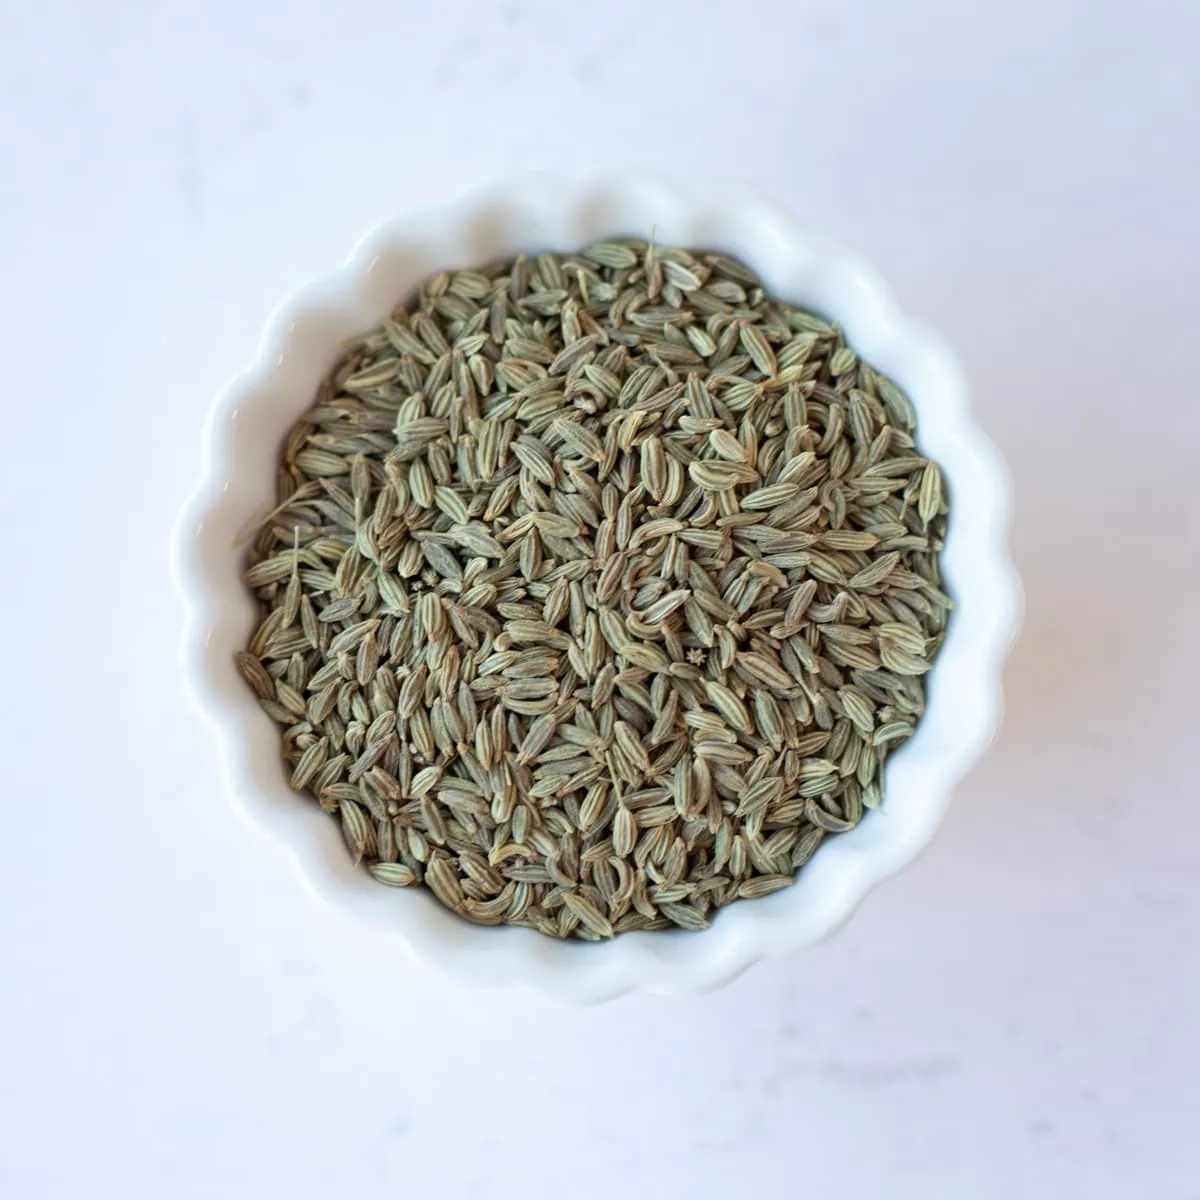 Fennel seeds in a small white bowl